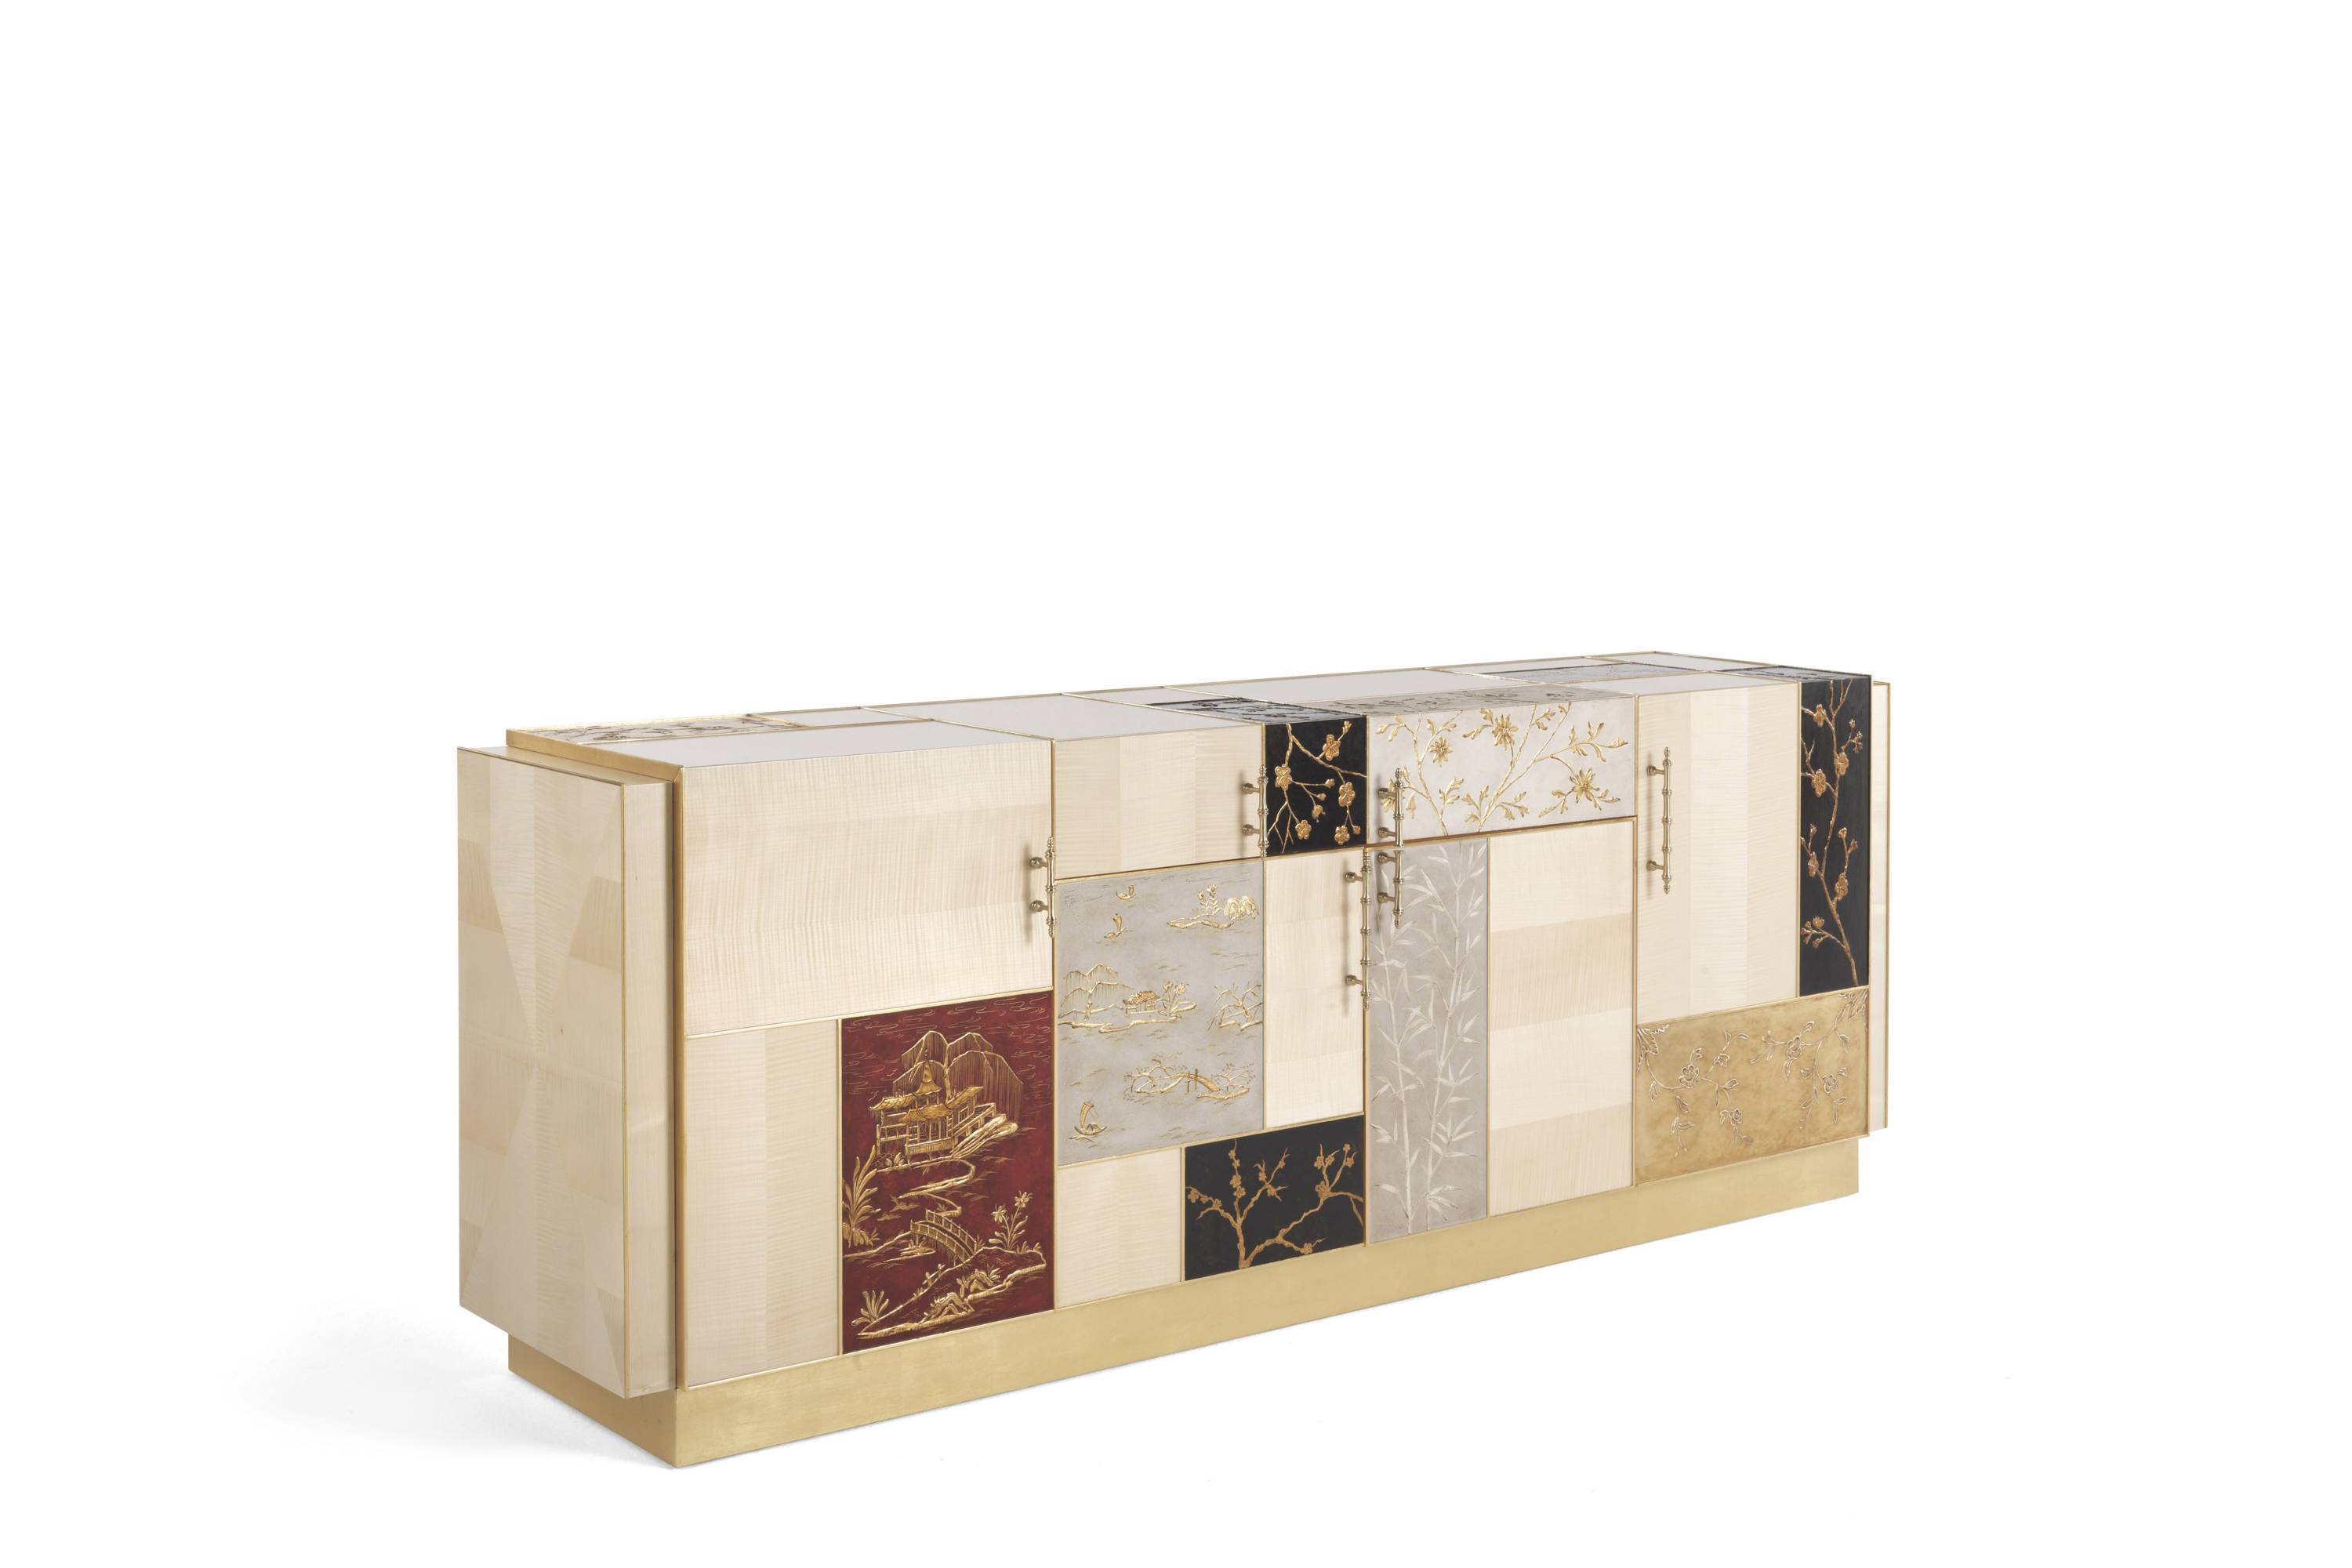 UKIYO sideboard - convey elegance to each space with italian classic day storage units of the classic Oro Bianco collection